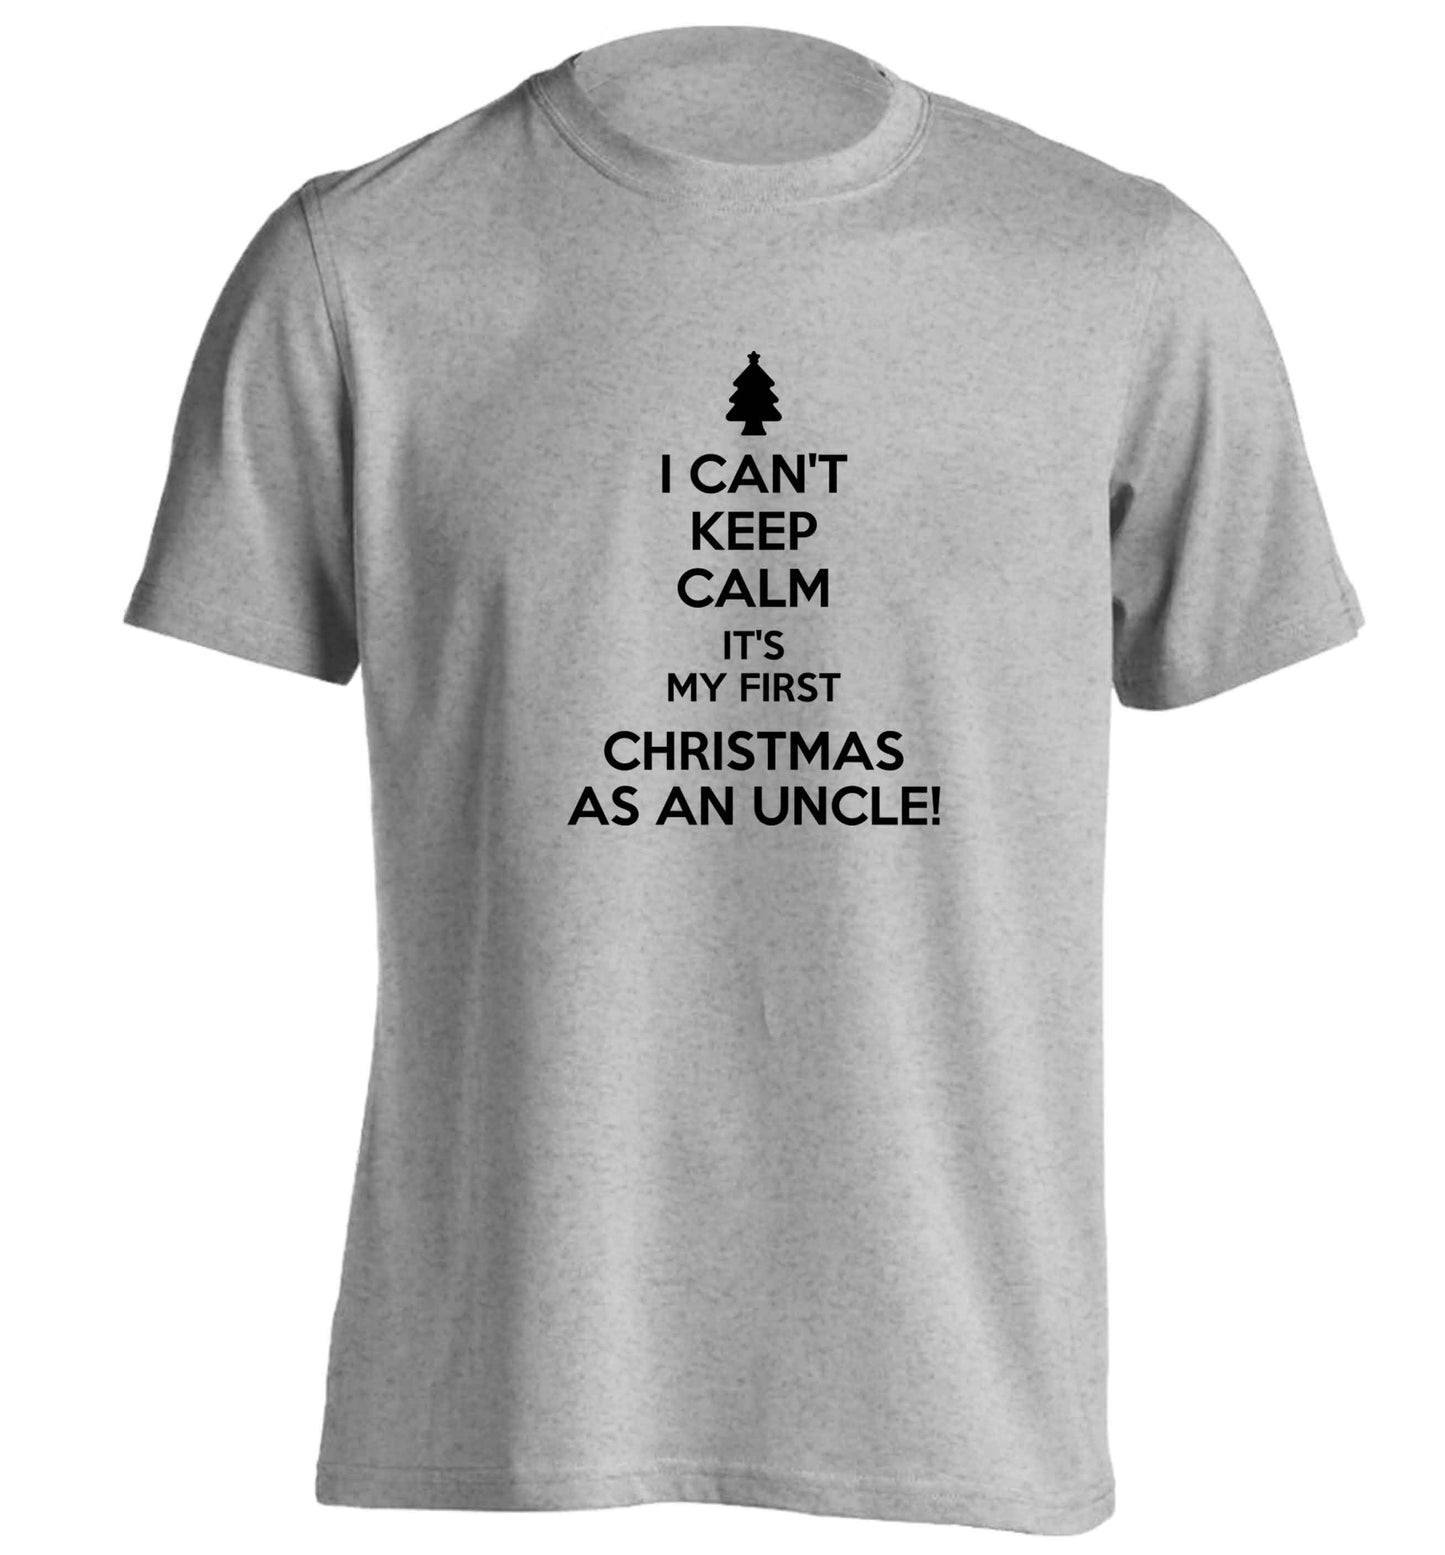 I can't keep calm it's my first Christmas as an uncle! adults unisex grey Tshirt 2XL